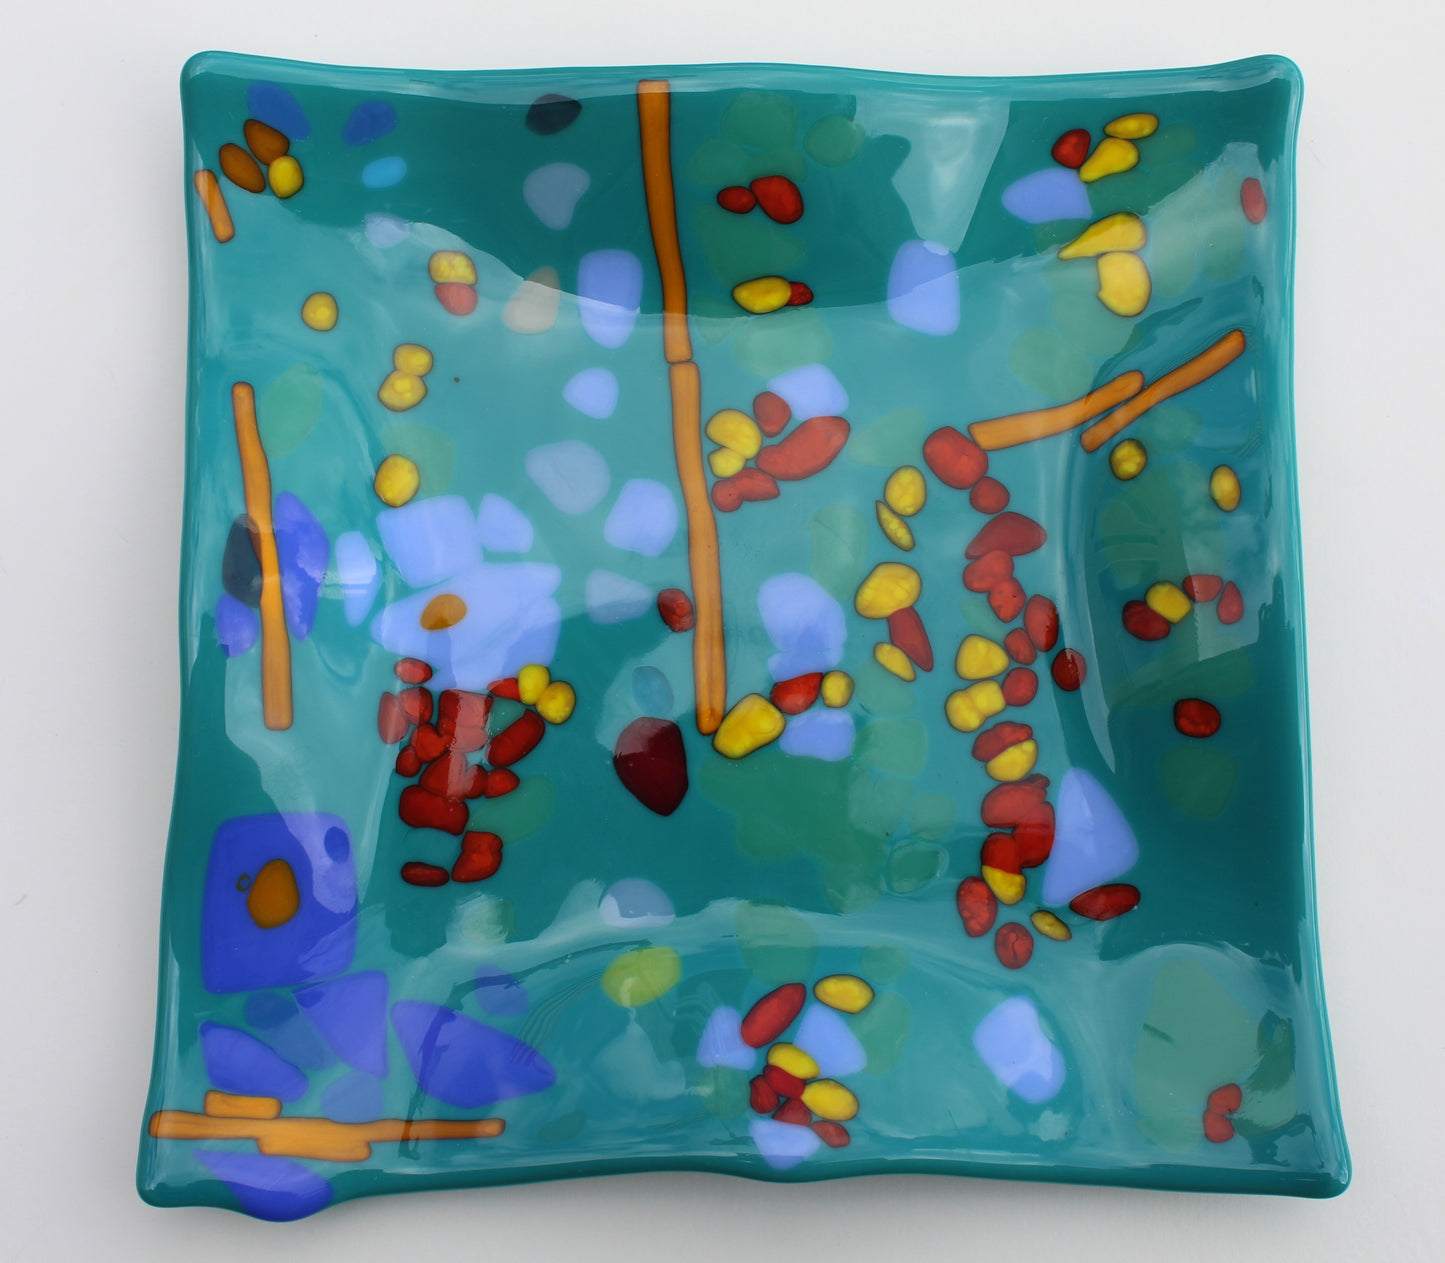 Teal glass wavy plate with accents of orange, yellow, red, and blue